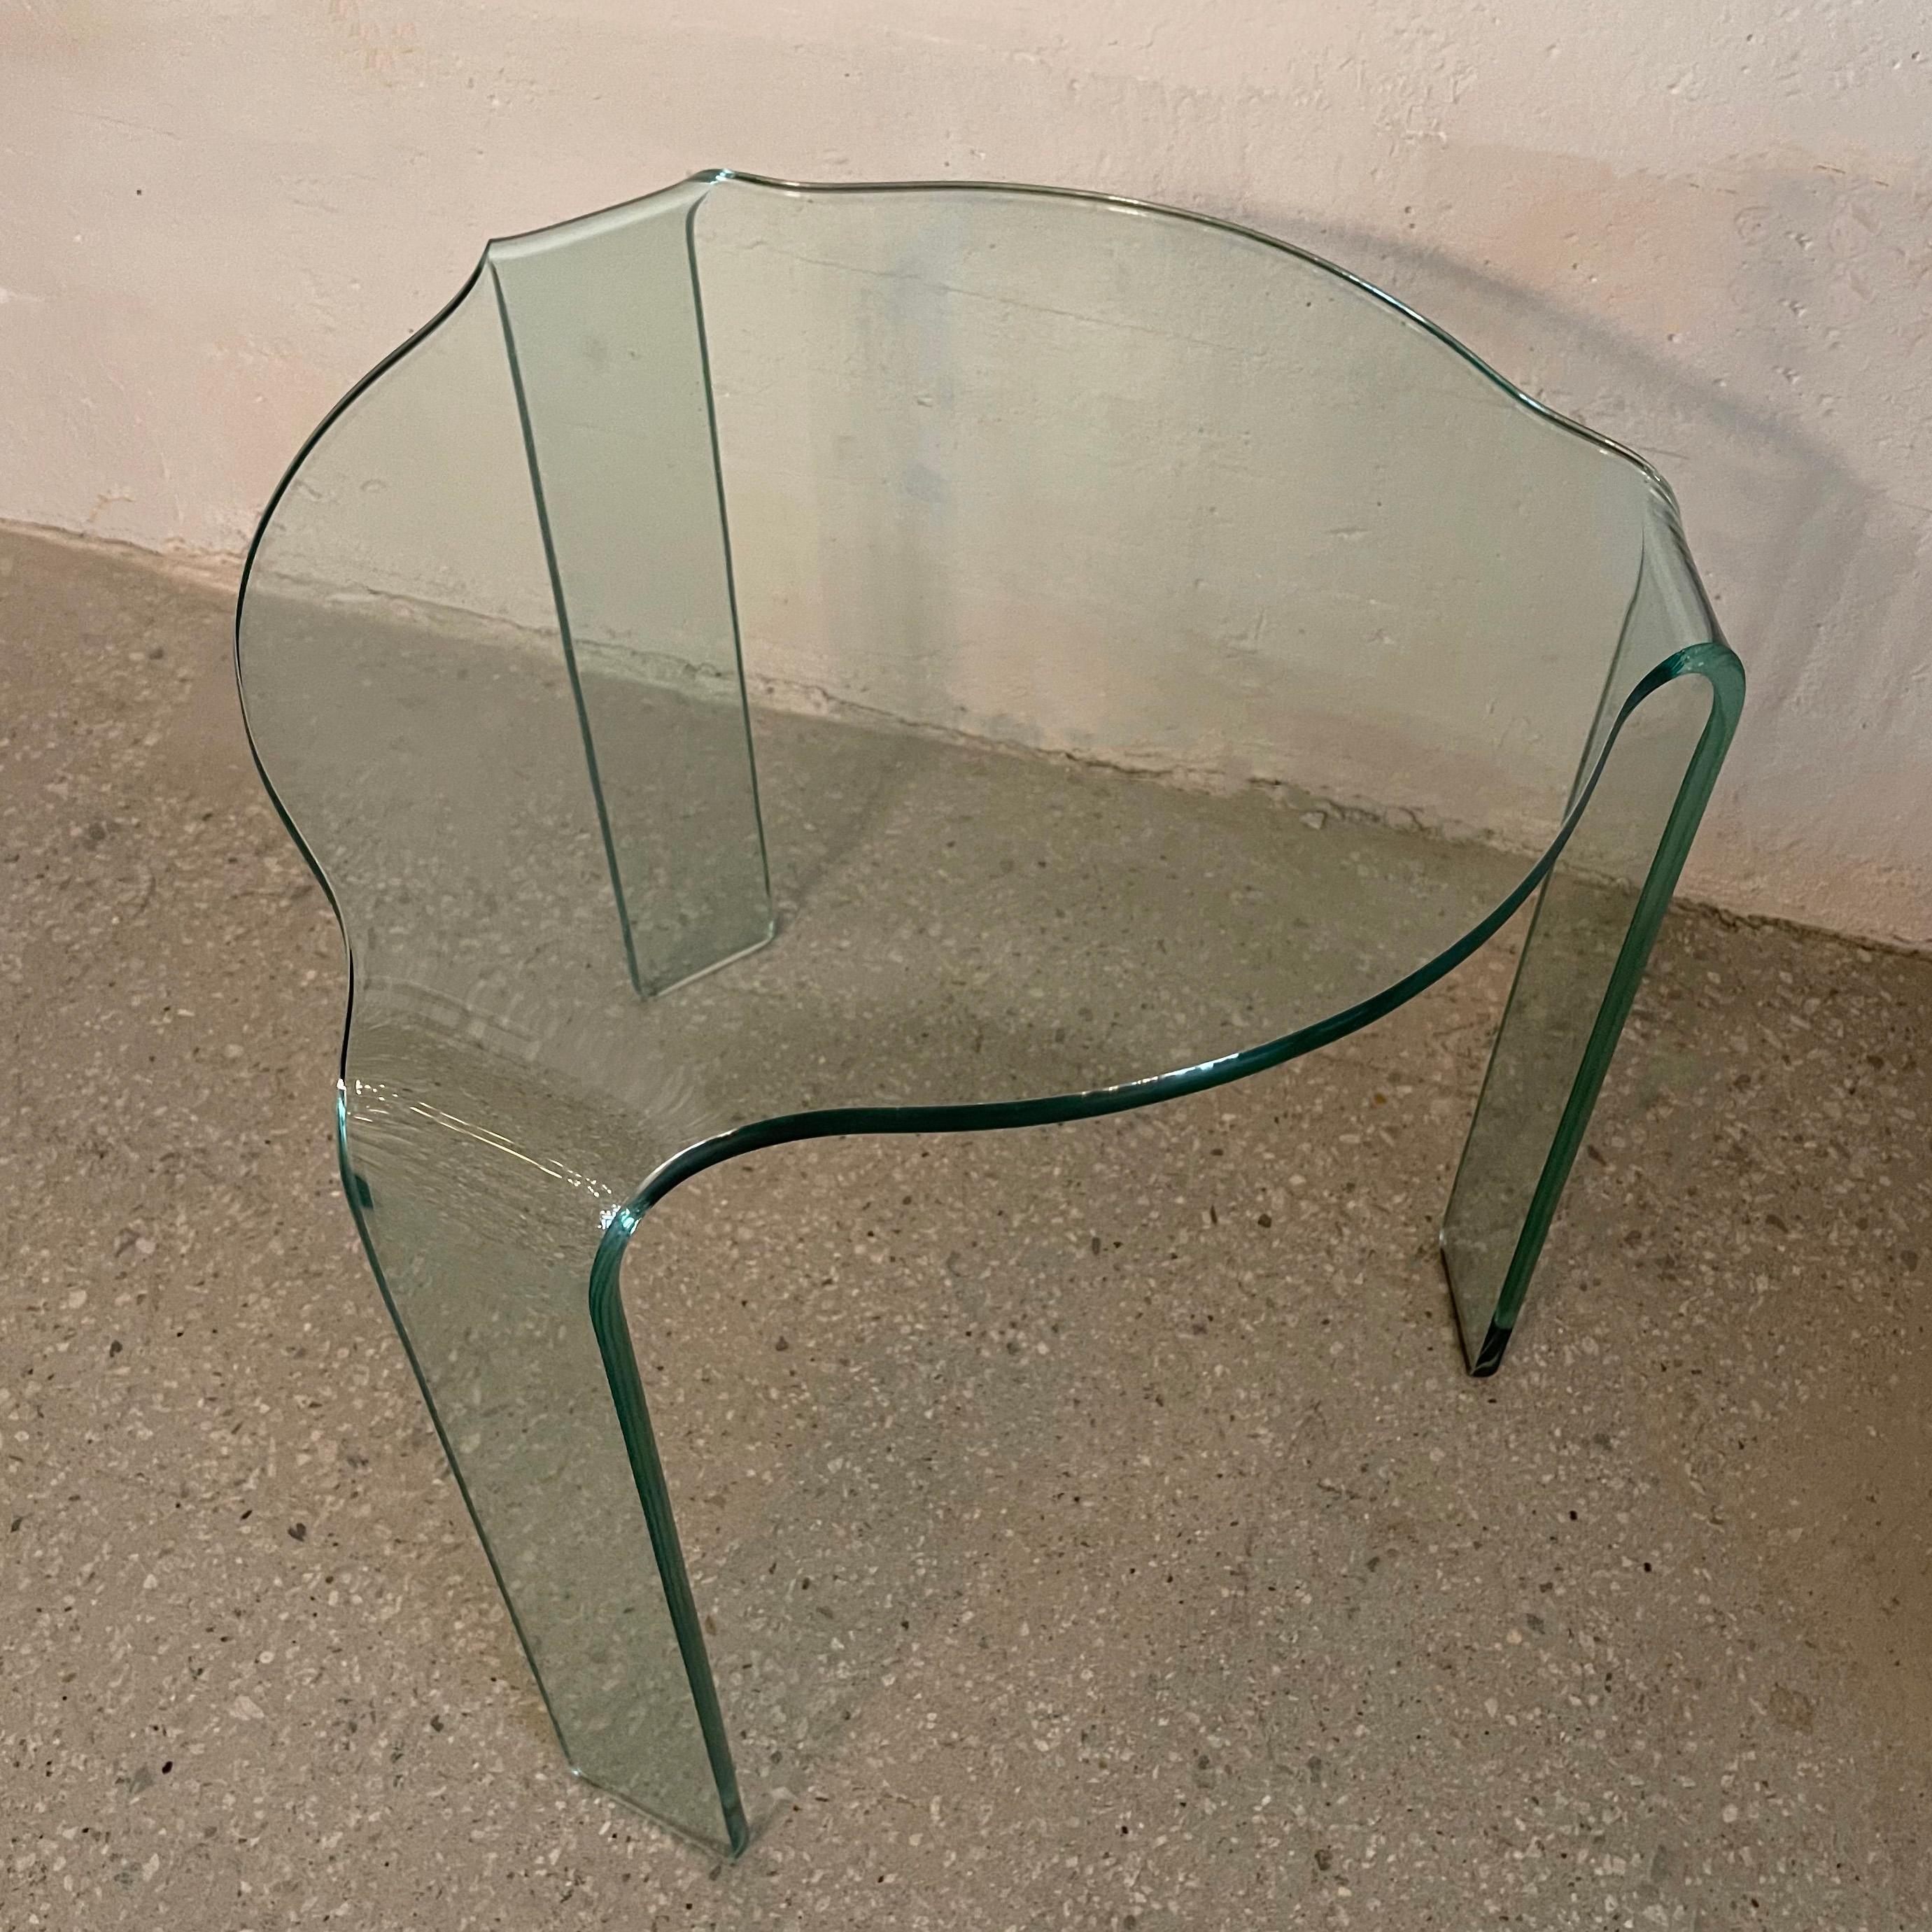 Modernist Bent Glass Side Table by Vittorio Livi for Fiam 1